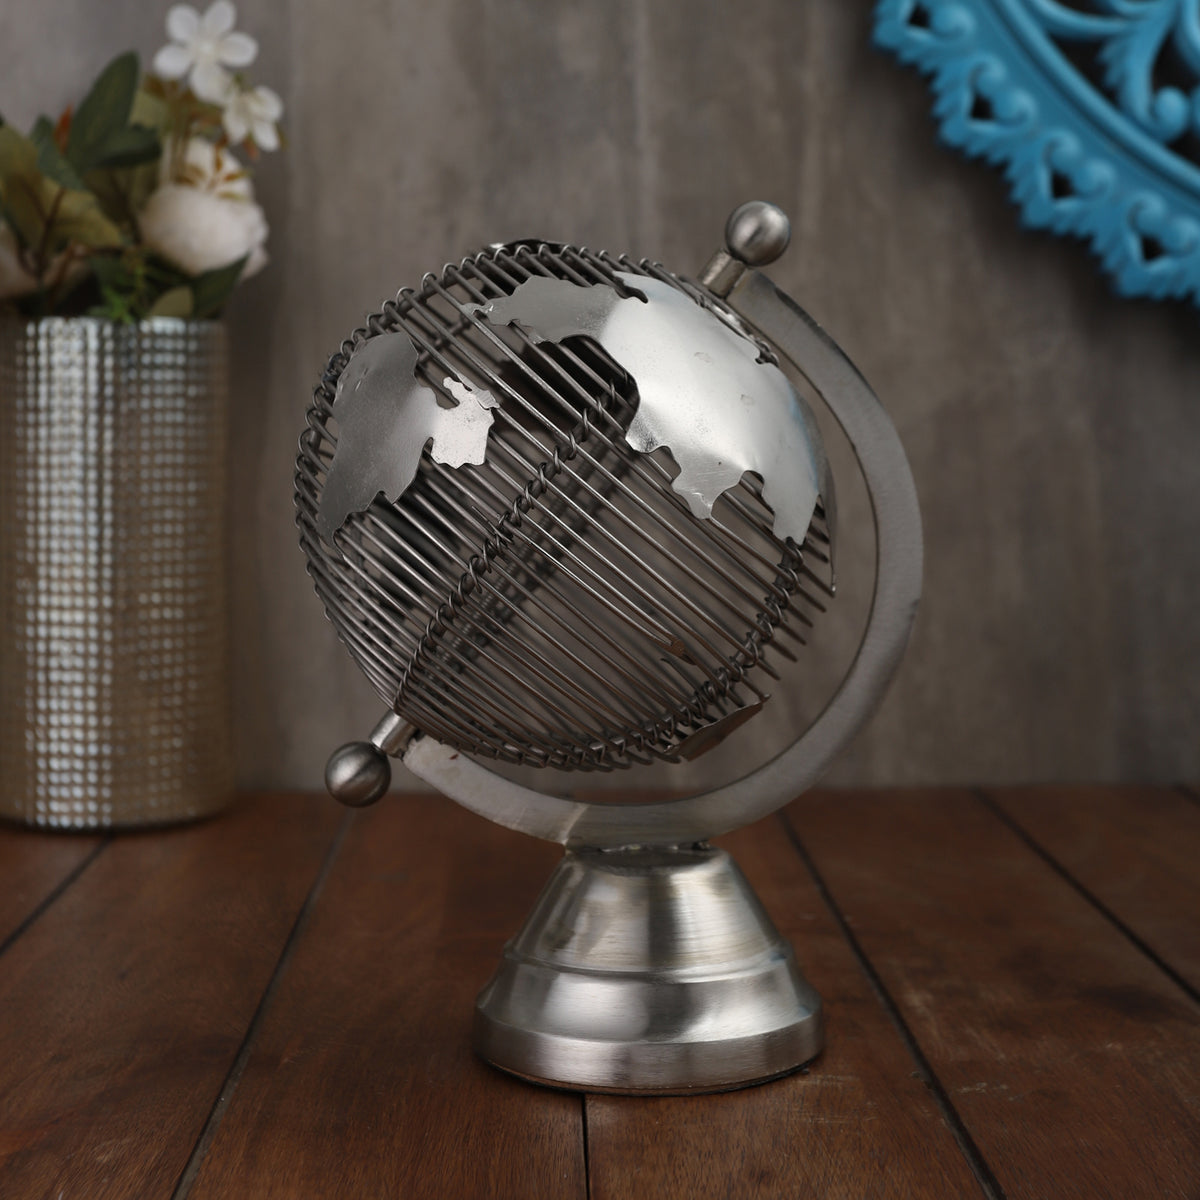 Silver Solidarity Globe Decor Piece for Table Decor Home Decor Office Desk Shelves and Gifts (Black/Small)